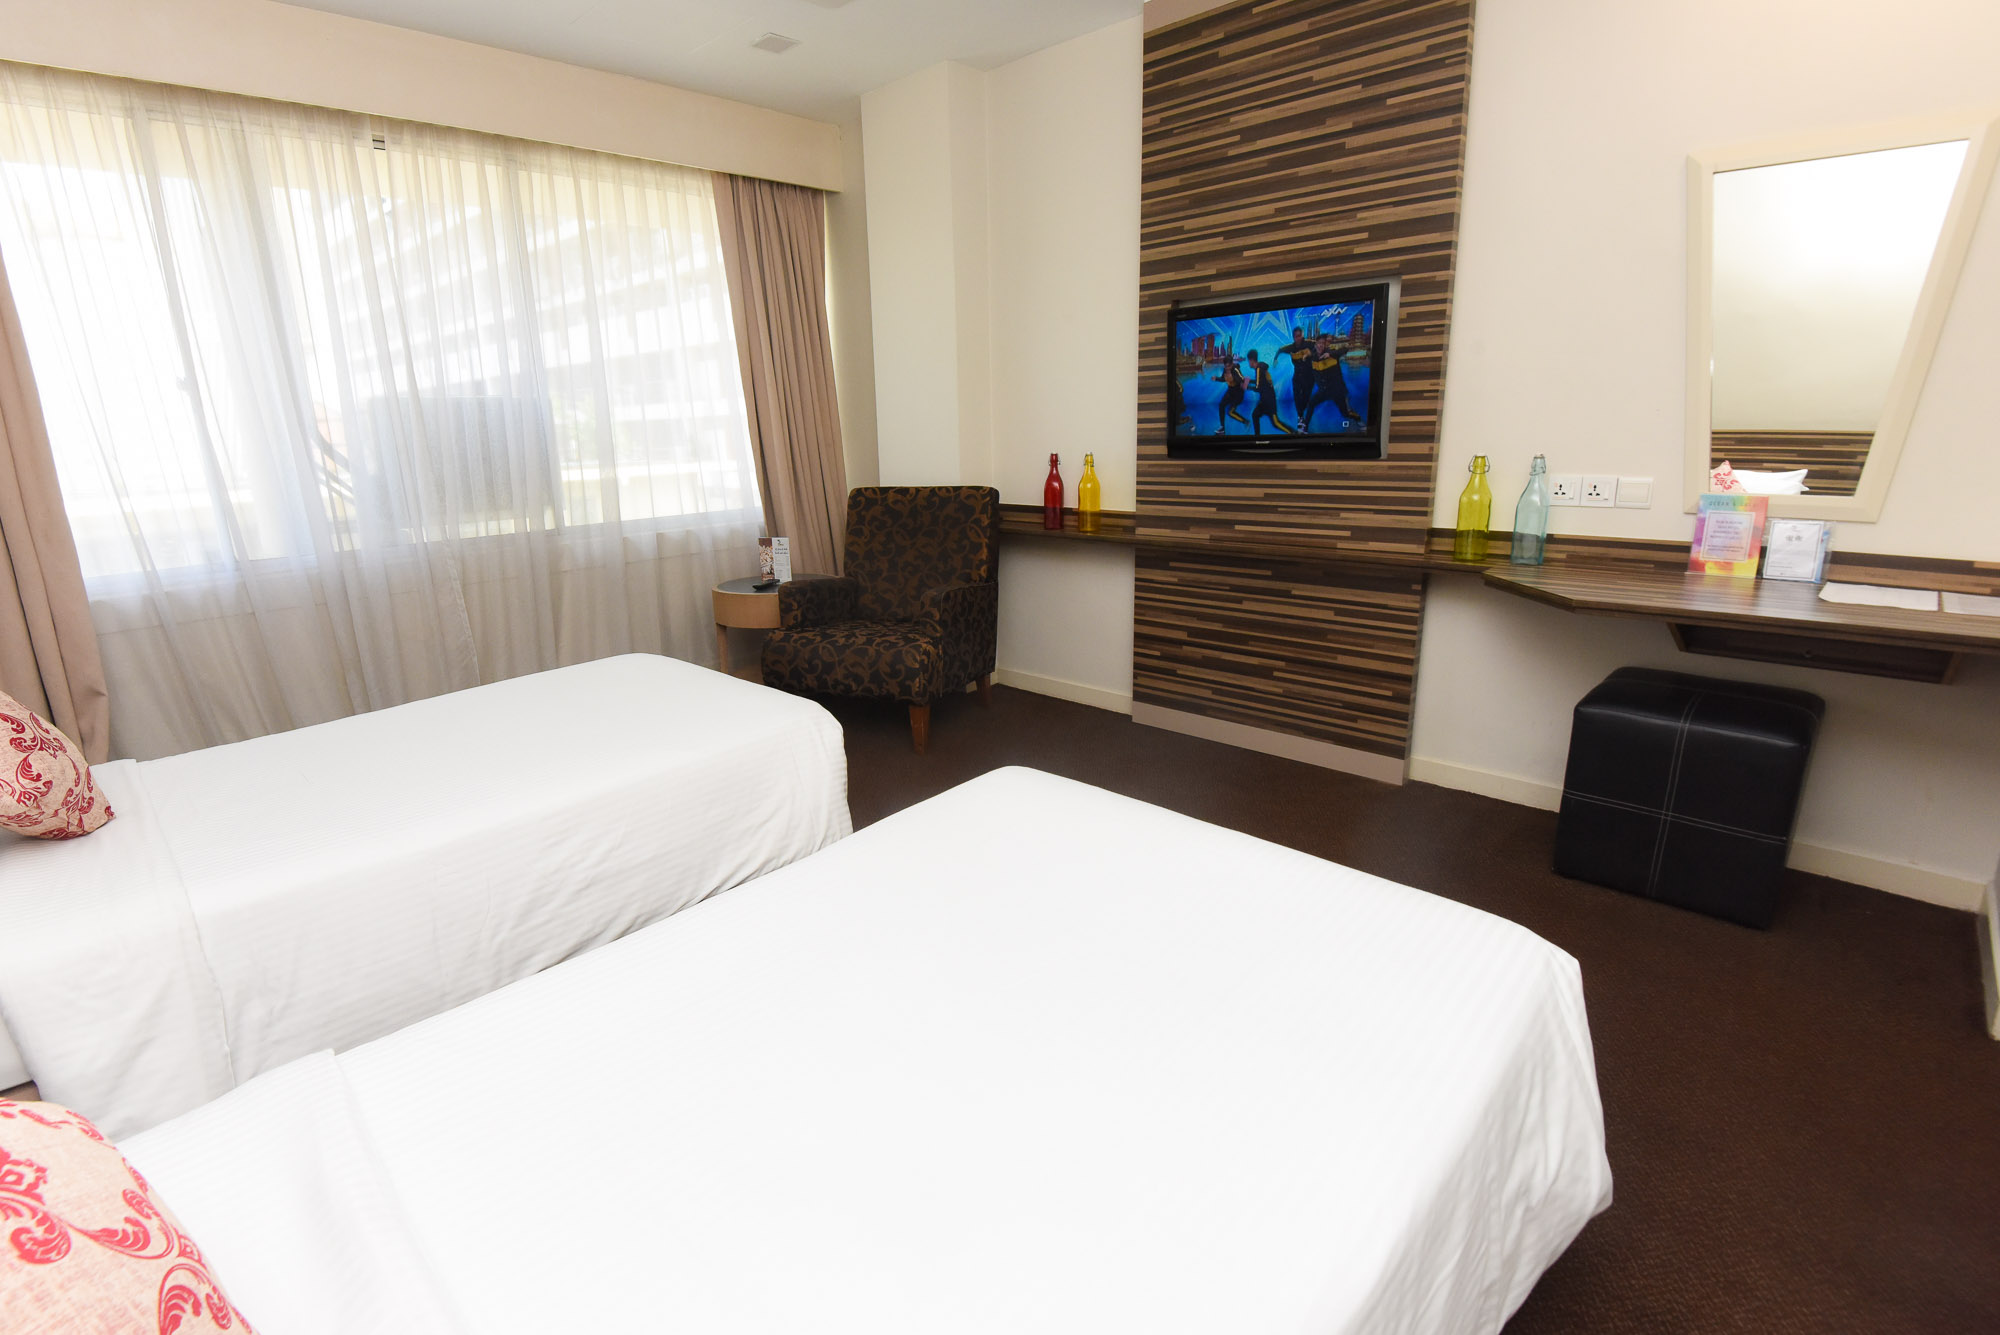 The Superior Twin room is designed to cater the needs of many with the comfortable twin beds, satellite television, complimentary WiFi, in-room safe and many more. Kick back and relax in this room for two. Dental kit, hair dryer and ironing facilities are available upon request.